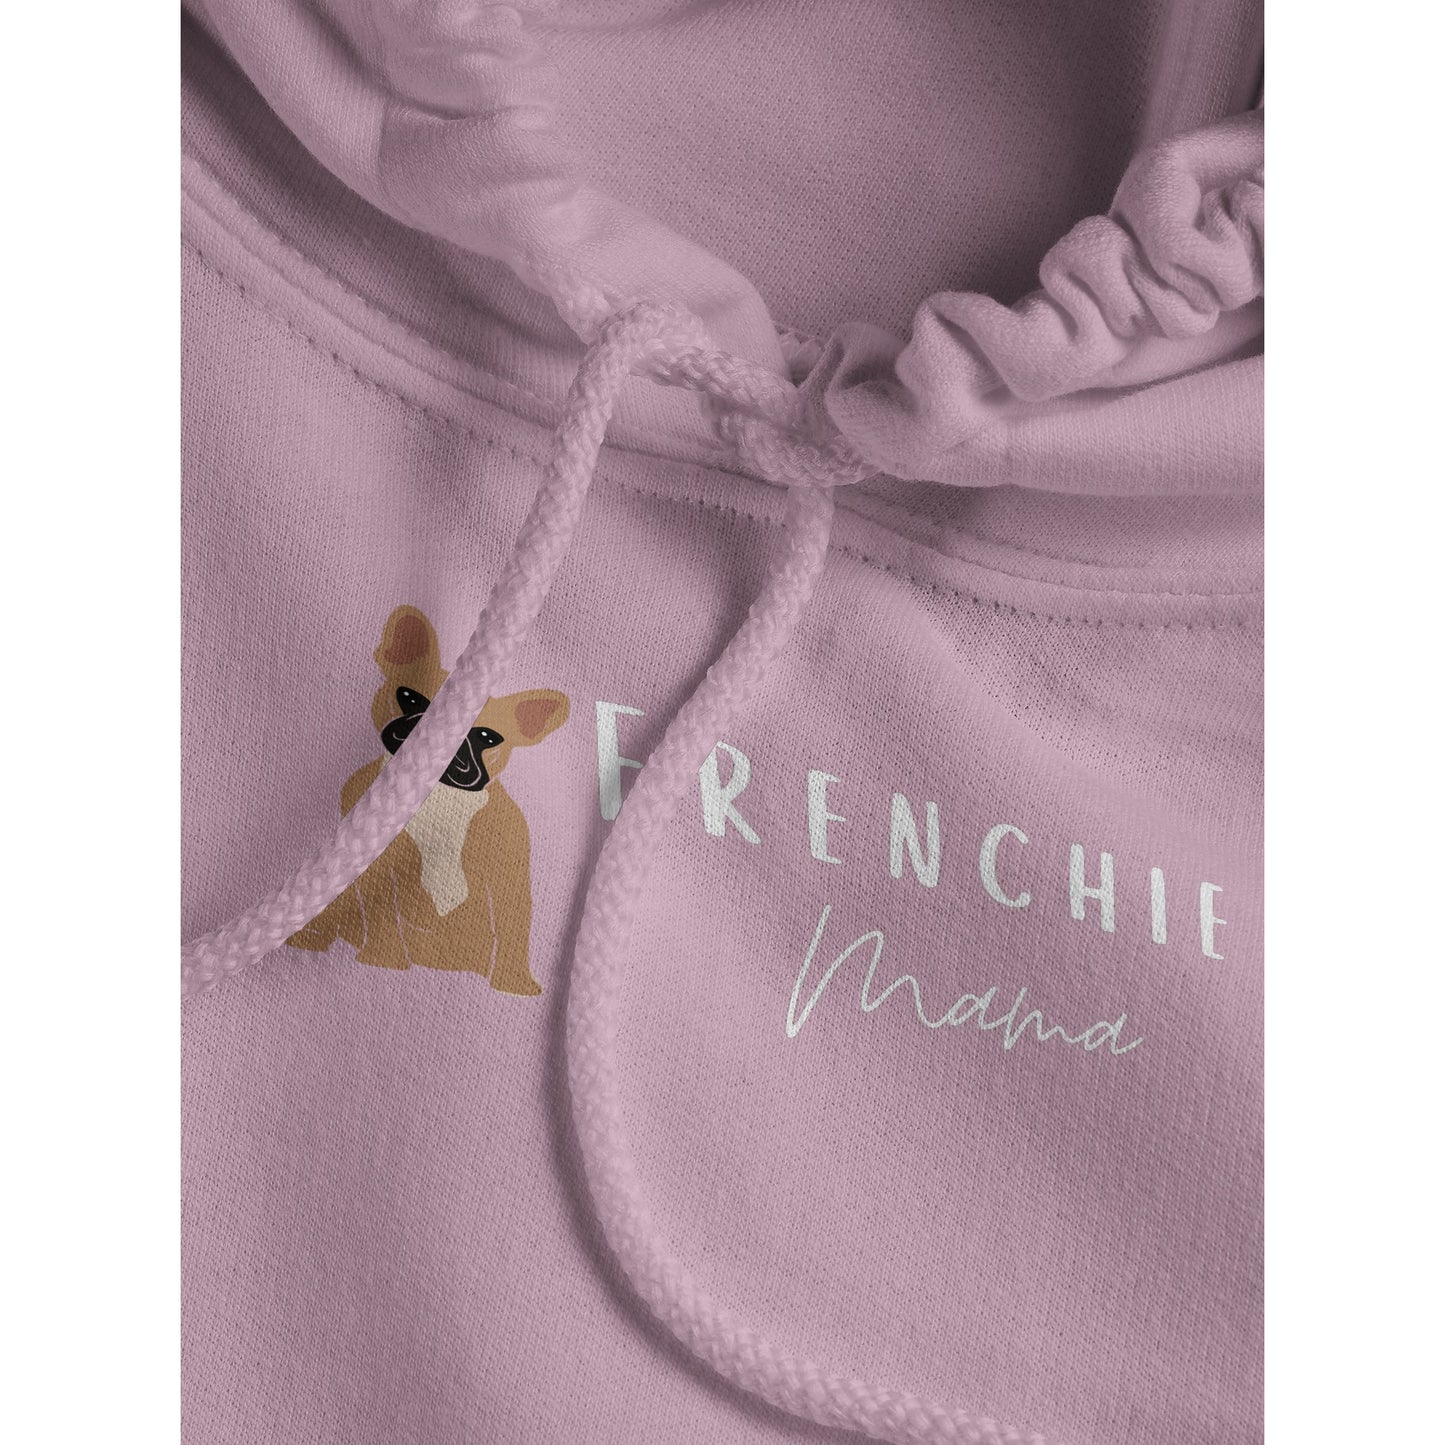 Frenchie Mama Classic Unisex Pullover Hoodie